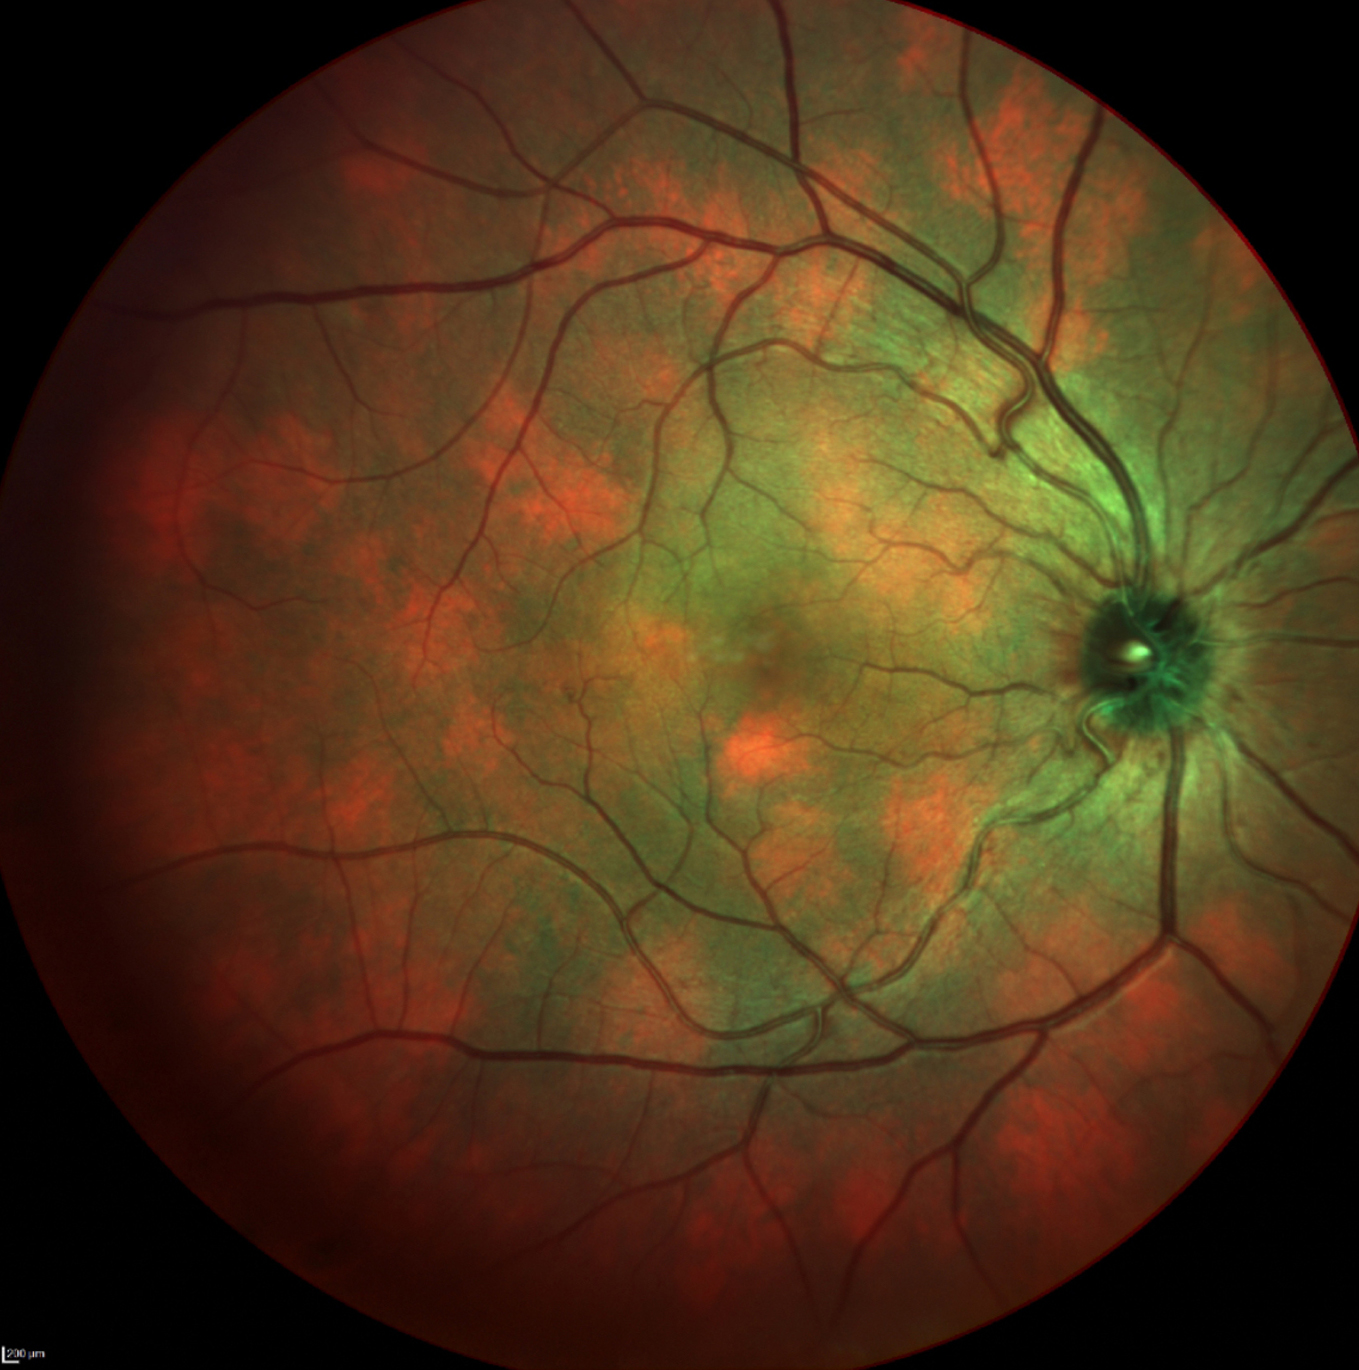 Choroidal nodules in a patient with neurofibromatosis type 1